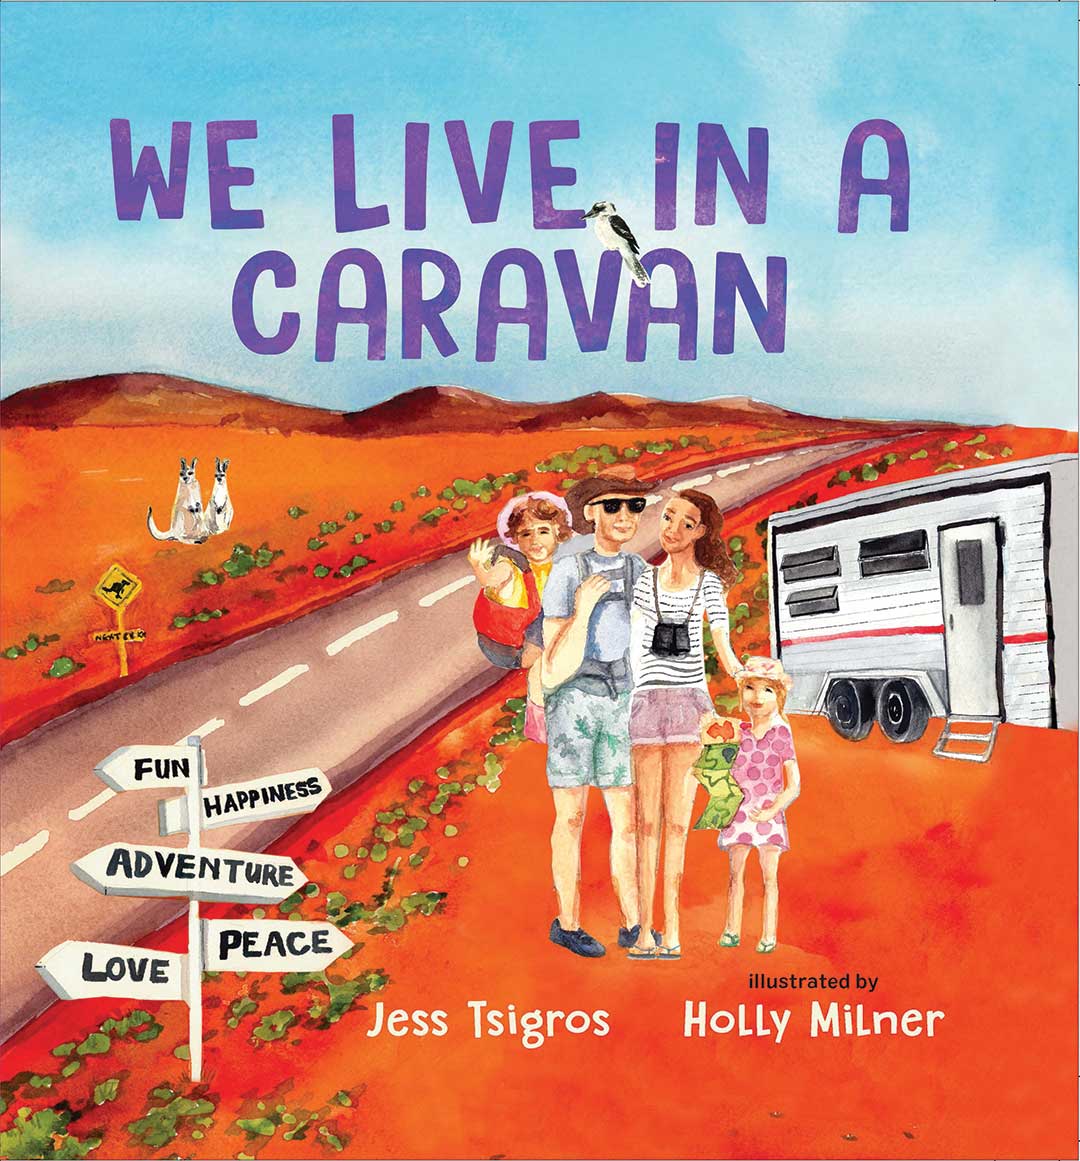 We Live in a Caravanby Jess Tsigro Illustrated by Holly Milner